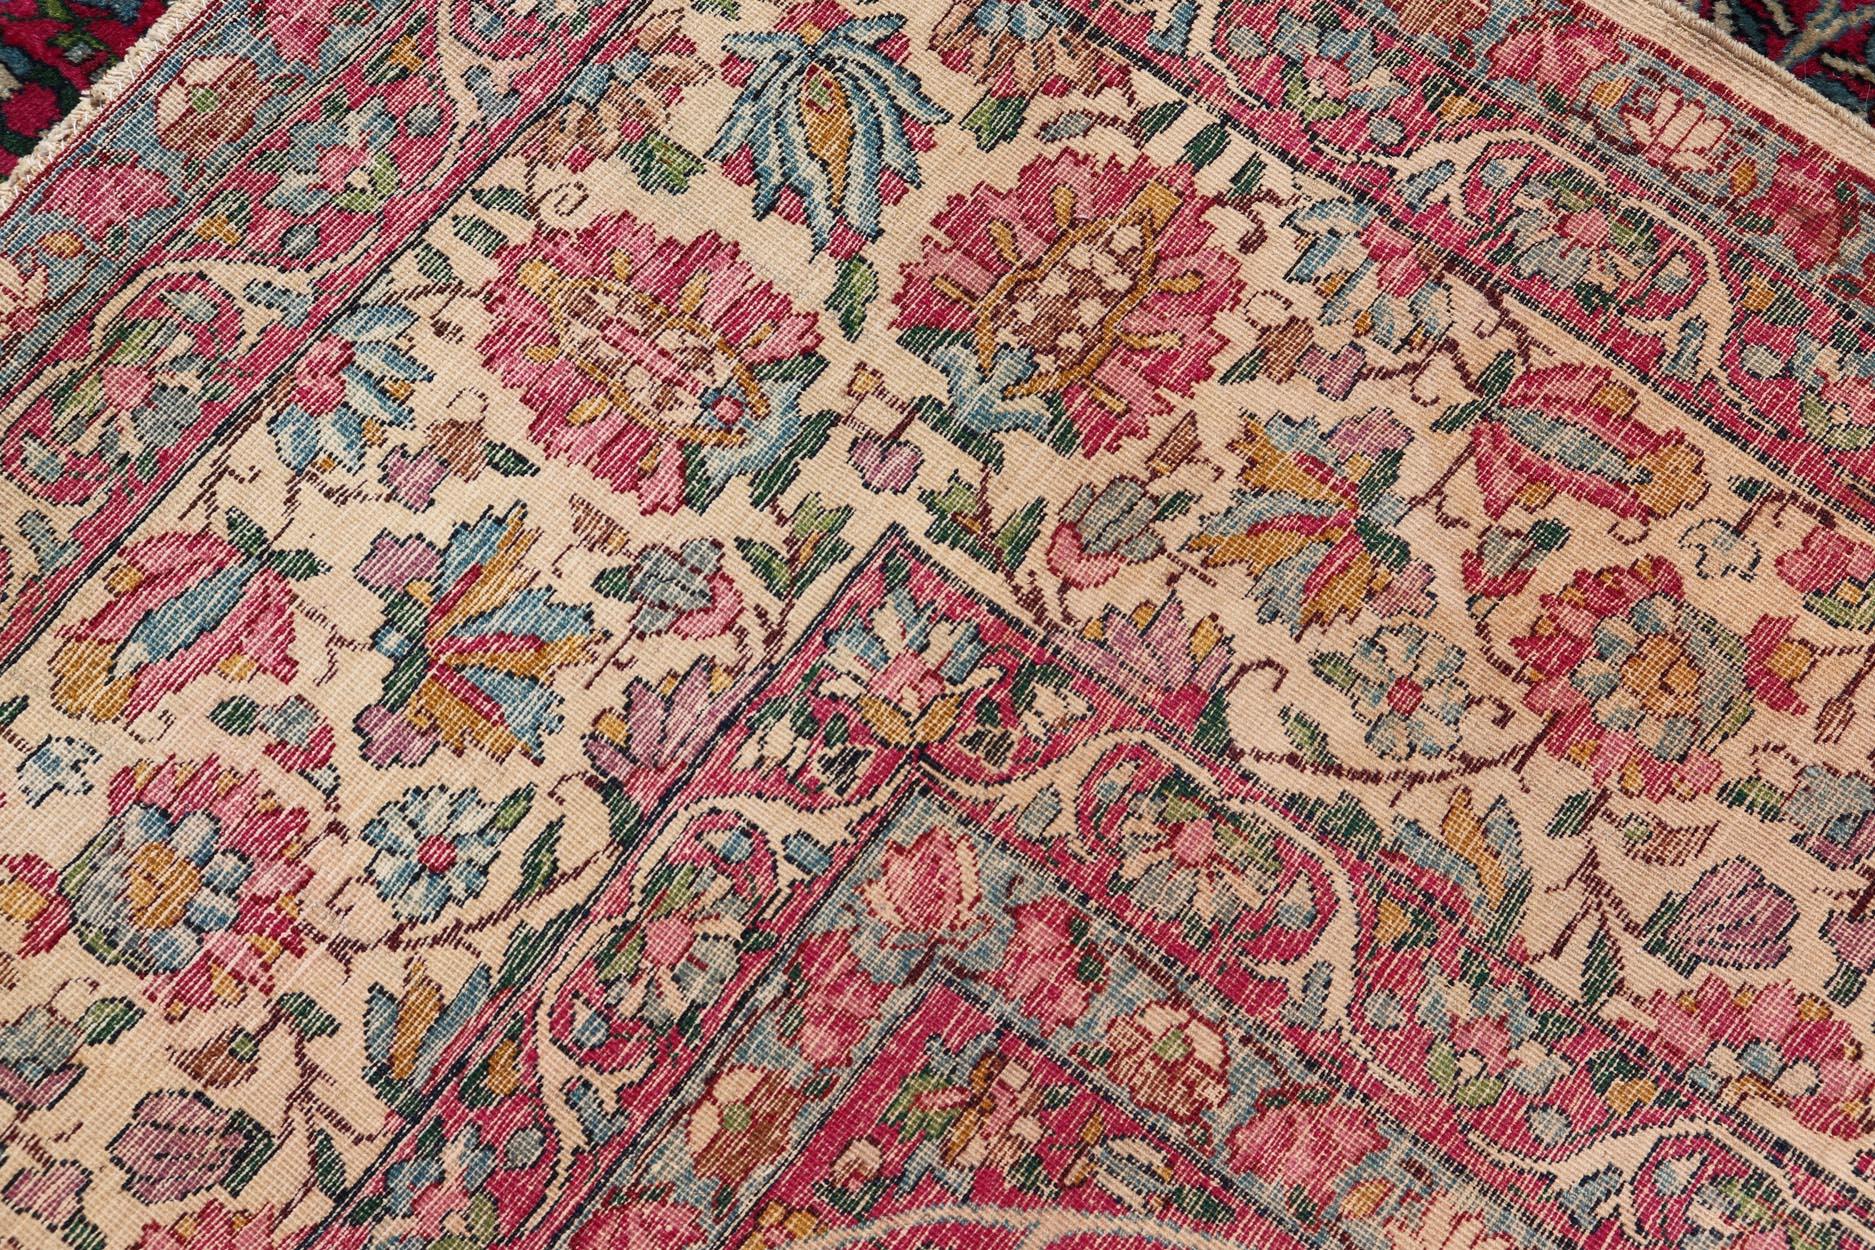  Antique Persian Lavar Kerman Rug with All-Over Floral Design In Jewel Tones  For Sale 4